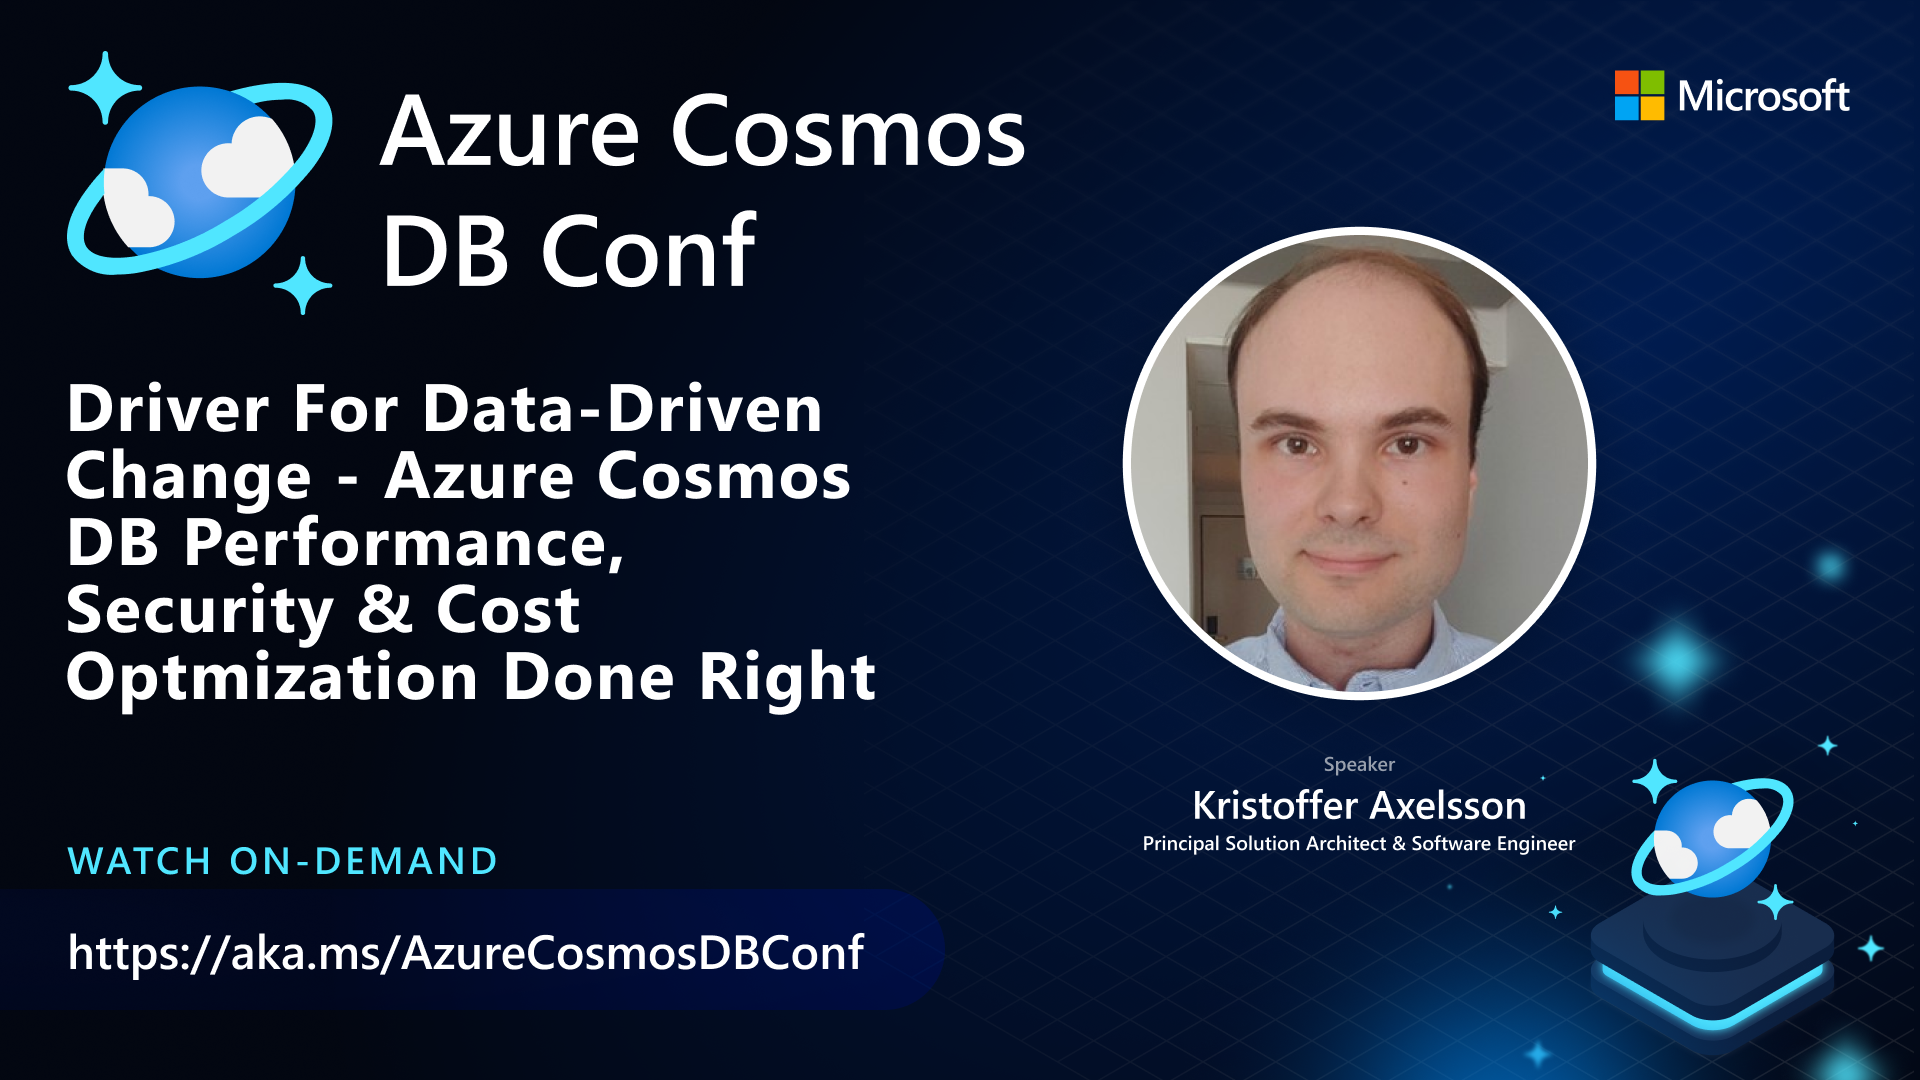 Driver For Data-Driven Change – Azure Cosmos DB Performance, Security & Cost Optimization Done Right, Kristoffers Sitzung auf der Azure Cosmos DB conf 2022